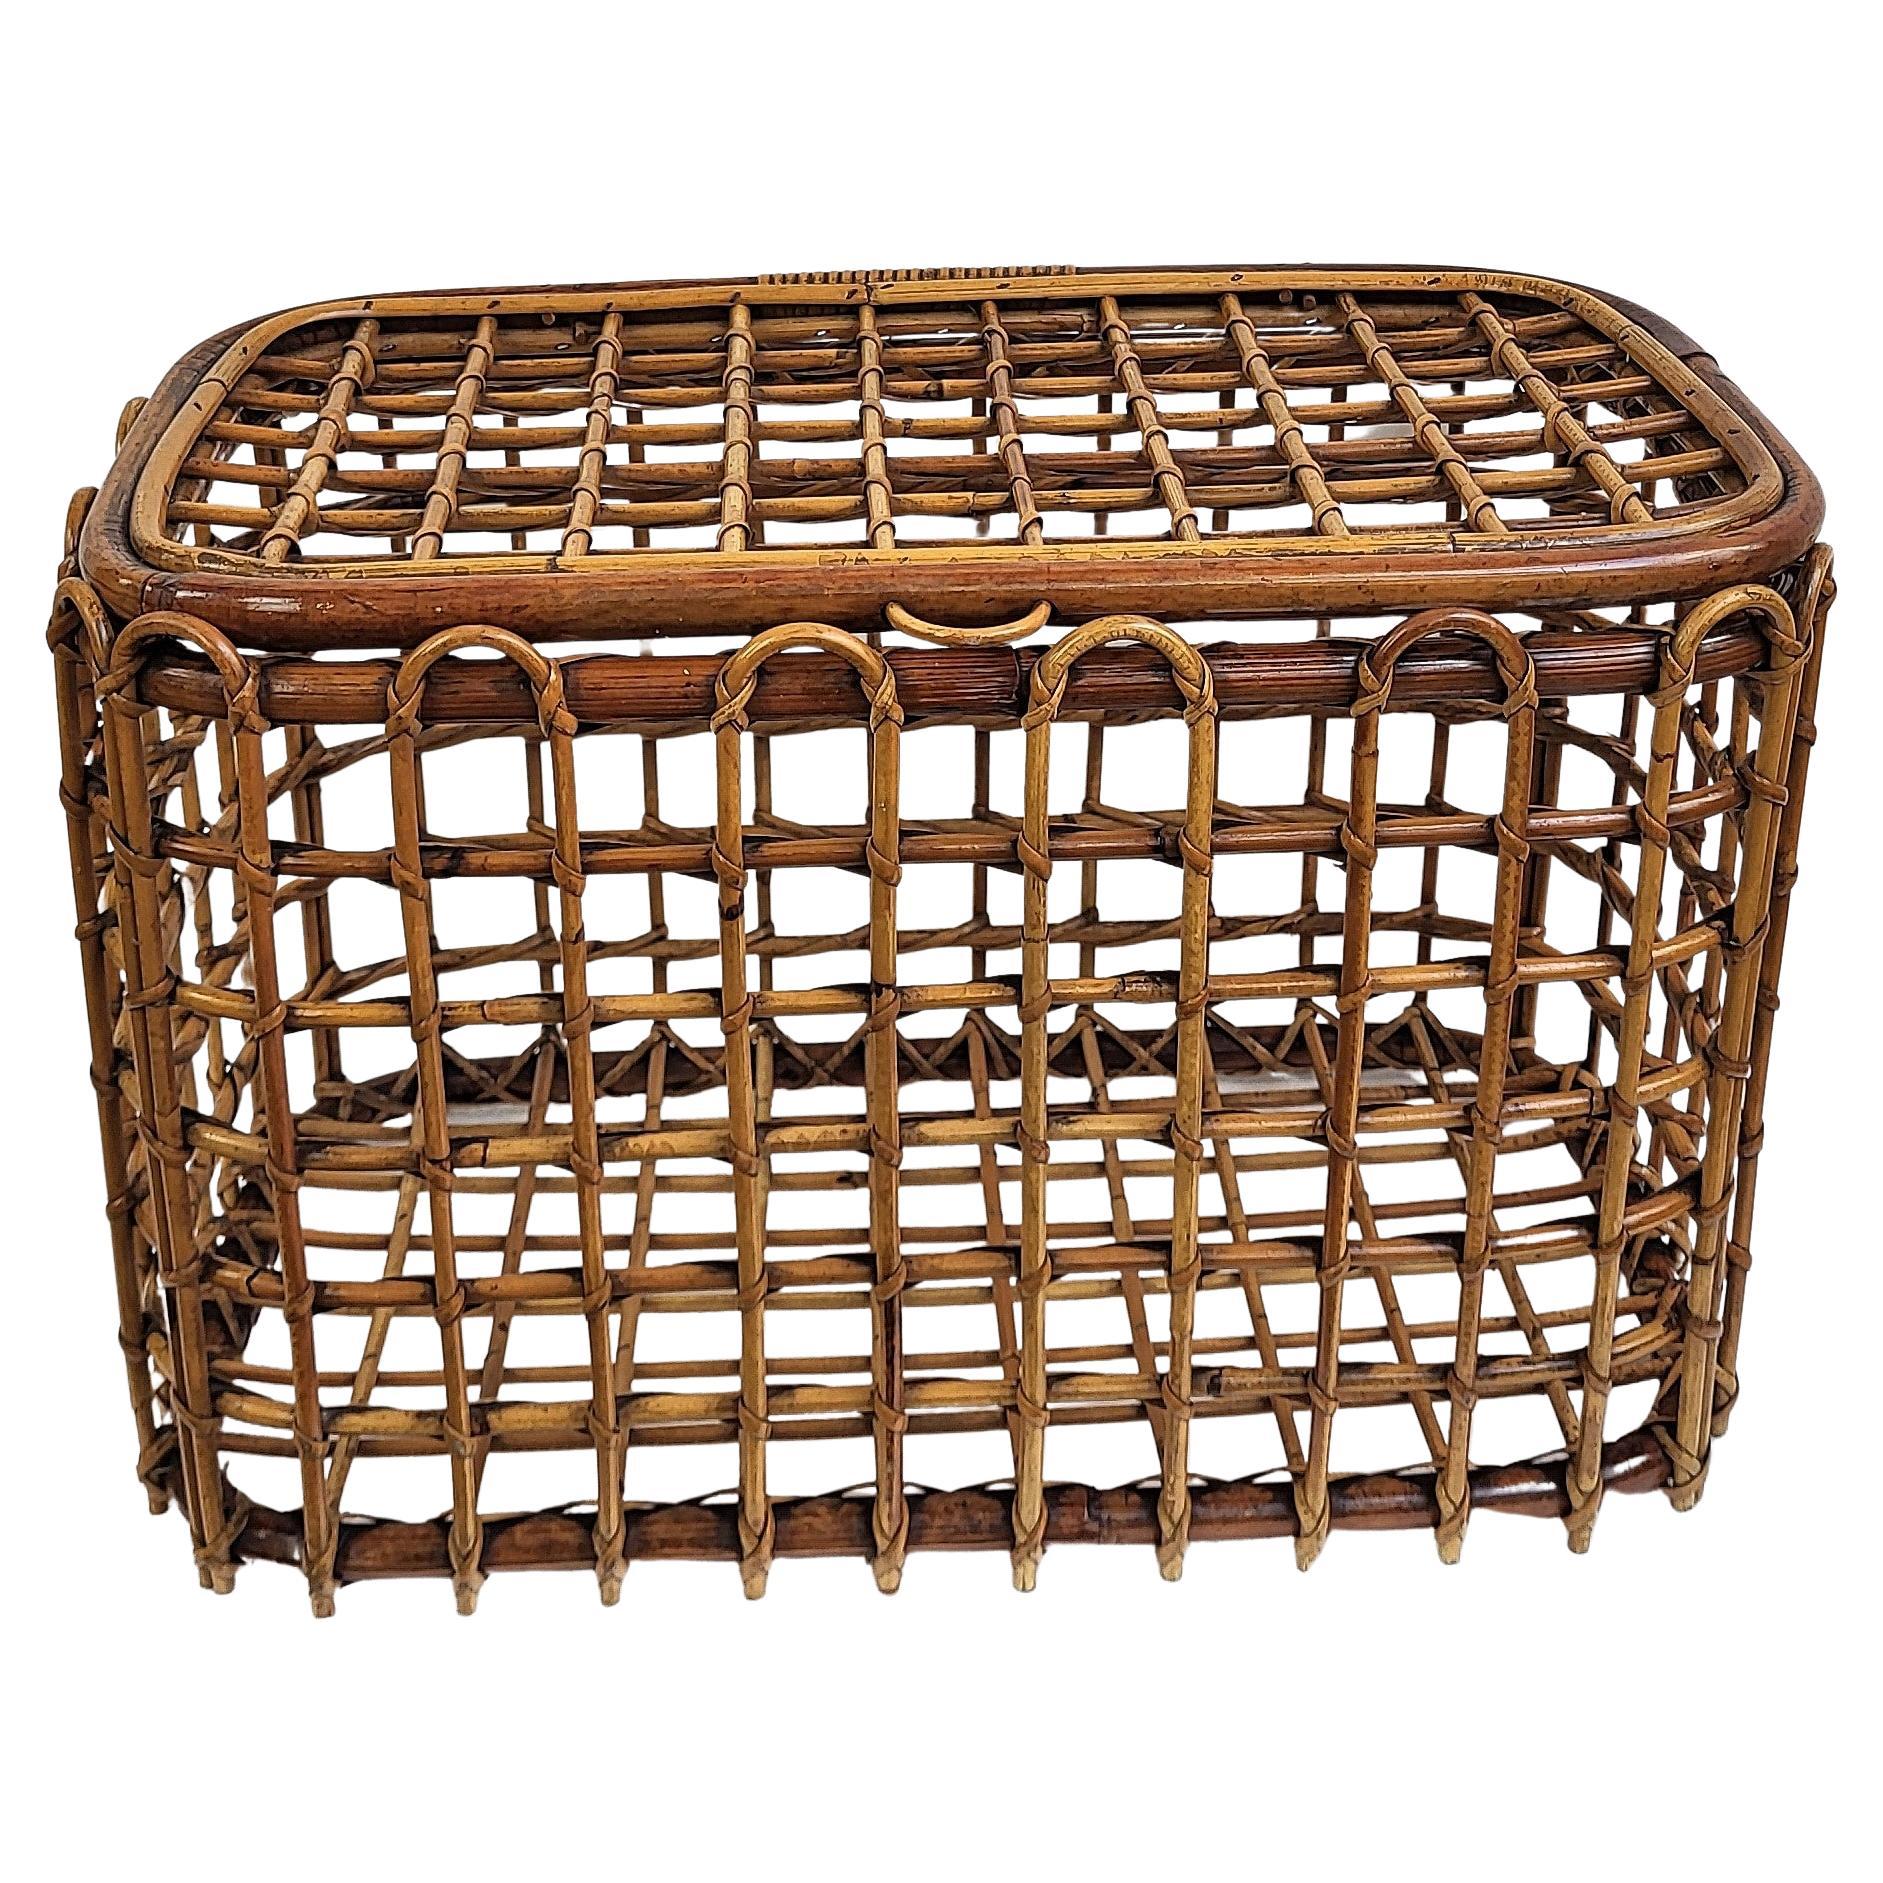 1960s Italian Designer Bamboo Rattan Bohemian French Riviera Basket Container For Sale